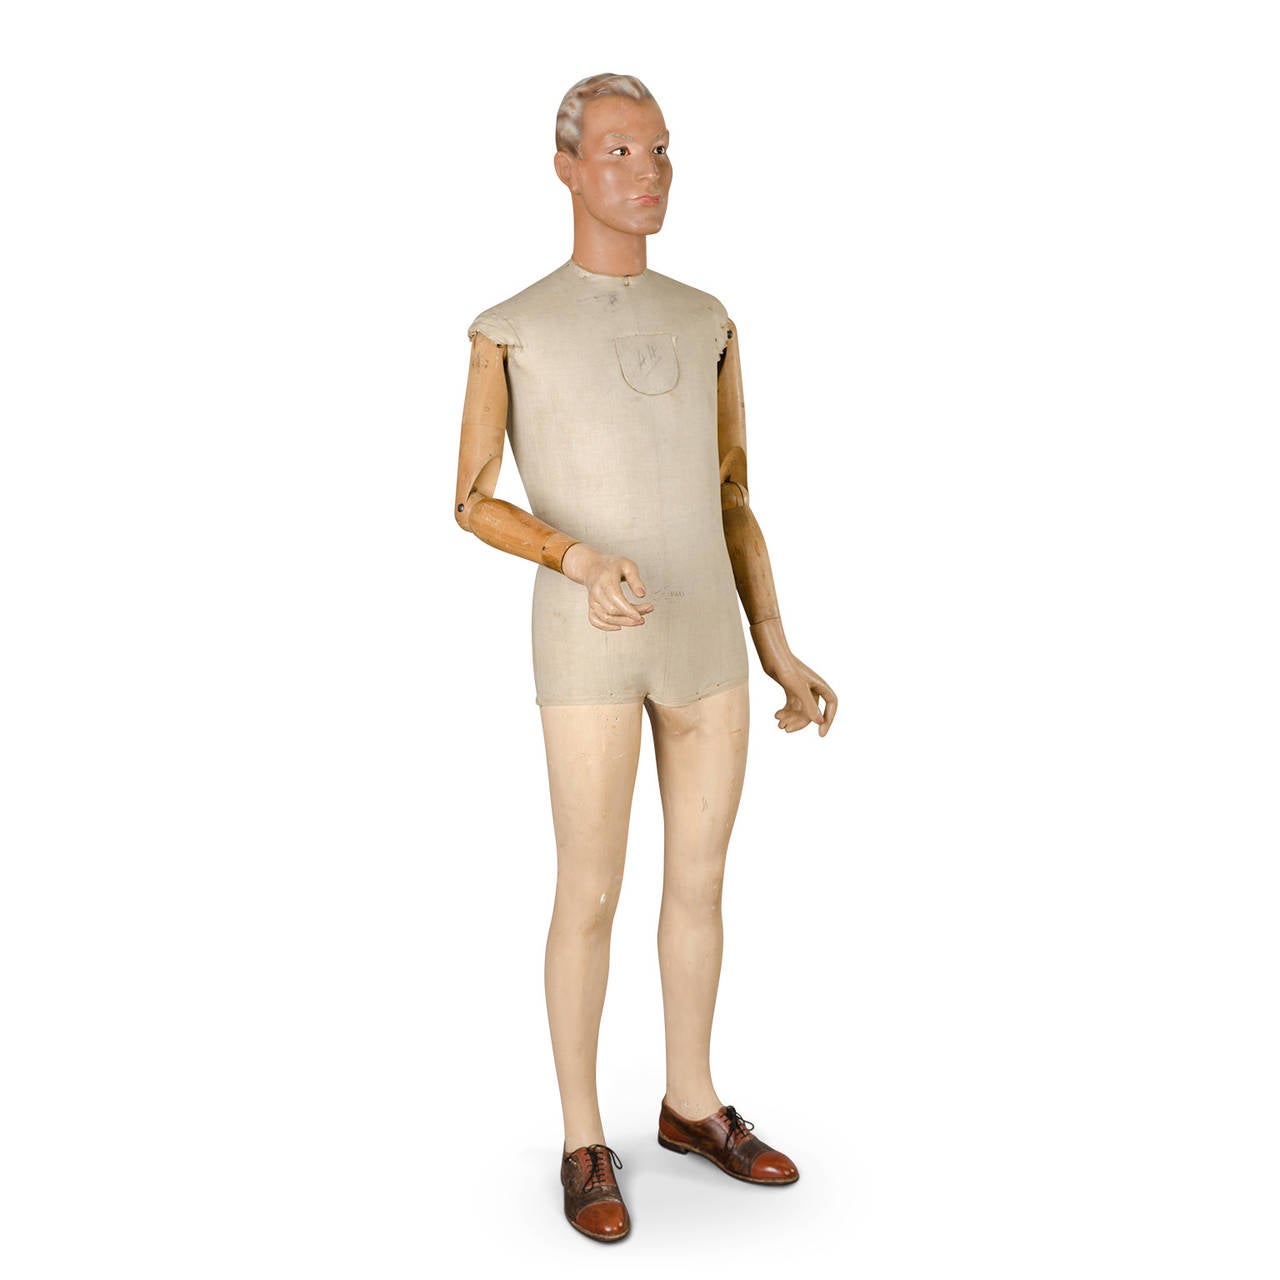 Man model mannequin signed Pierre IMANS - Paris. Plaster head, legs and hands. Wood articulated arms. Glass eyes.